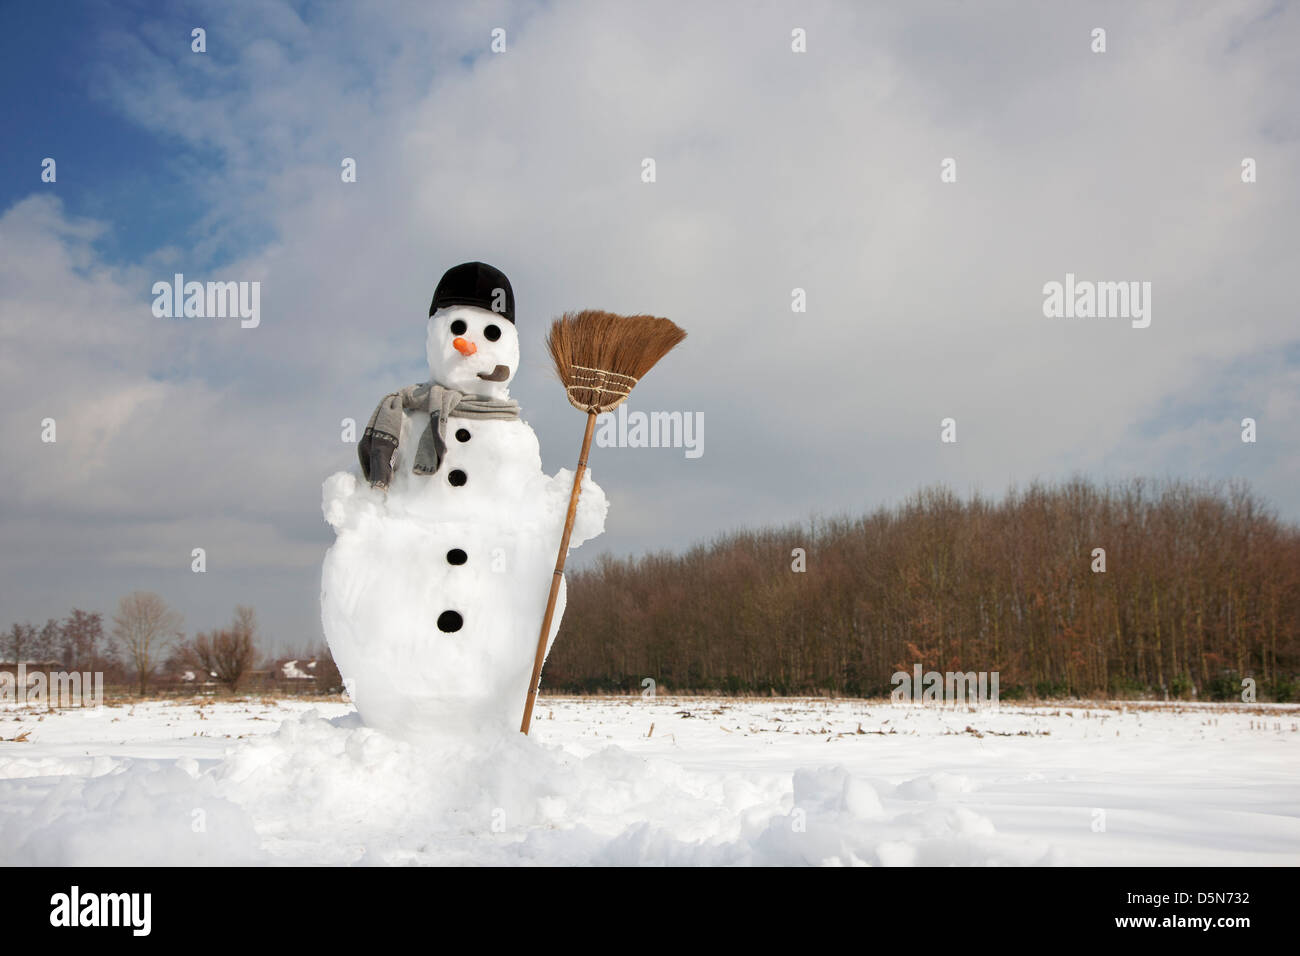 Decorated happy snowman with carrot nose, hat, pipe, scarf and broom in the snow in winter Stock Photo